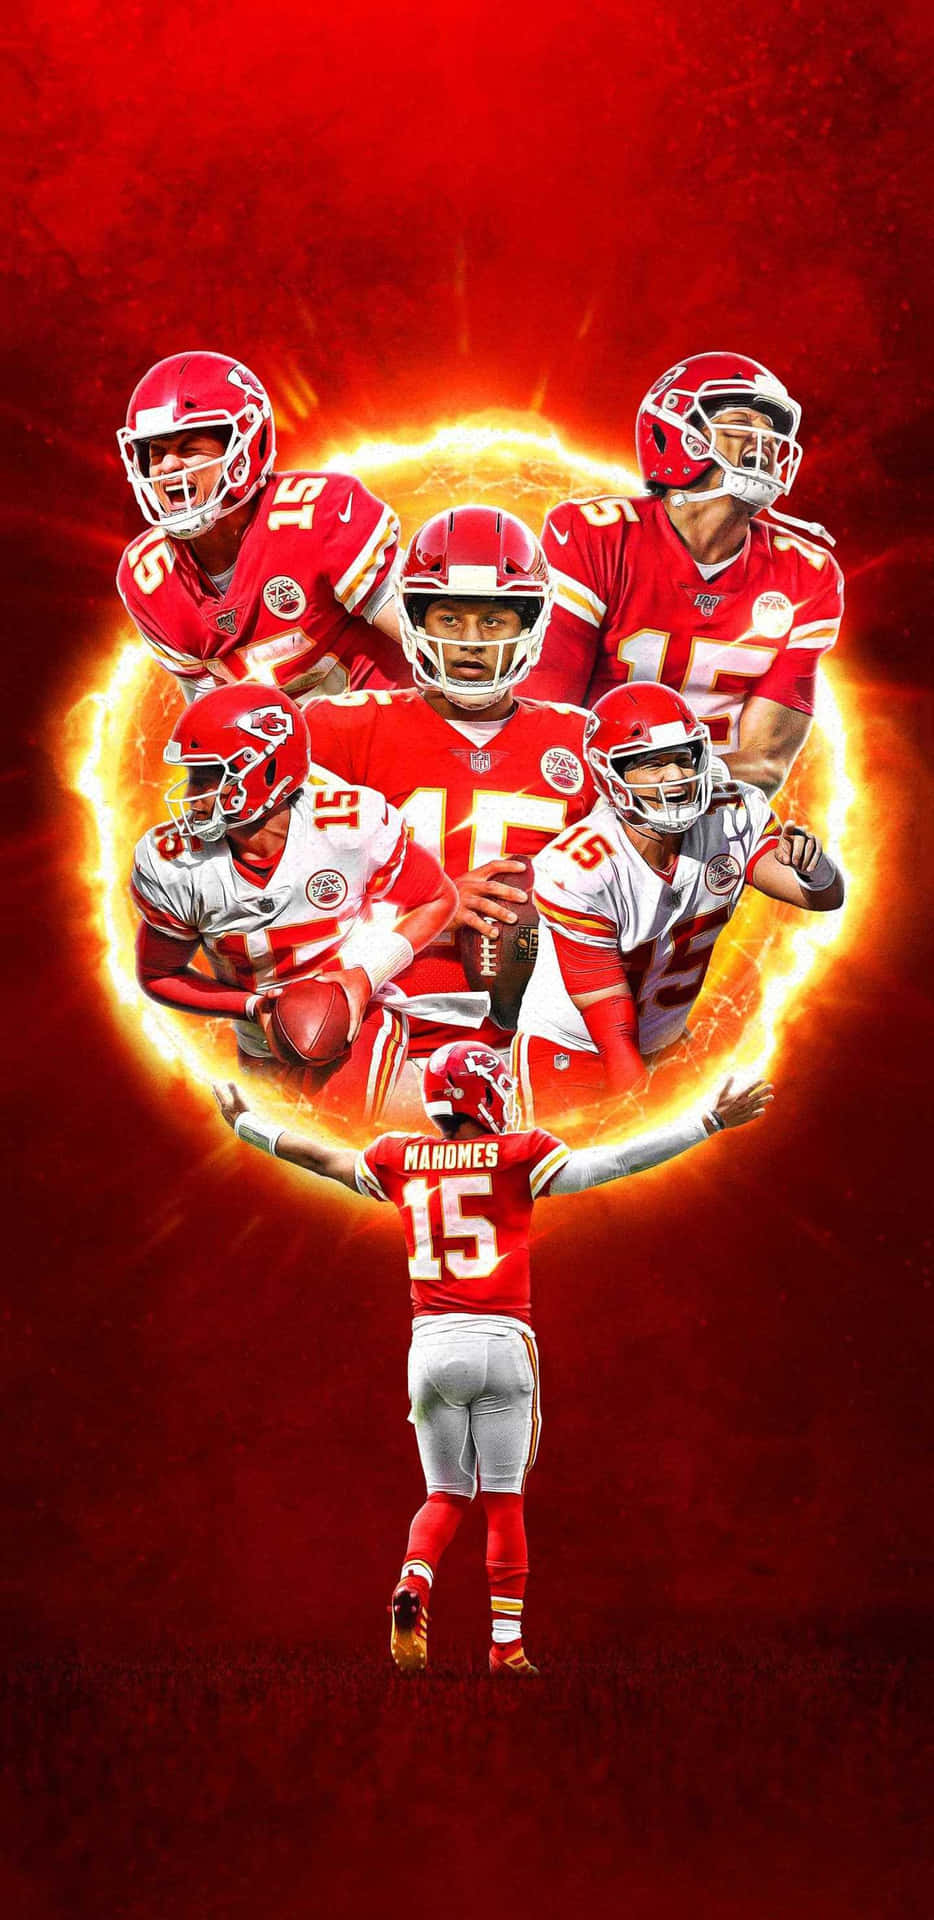 Patrick Mahomes Cool Graphic Artwork With Fire Background